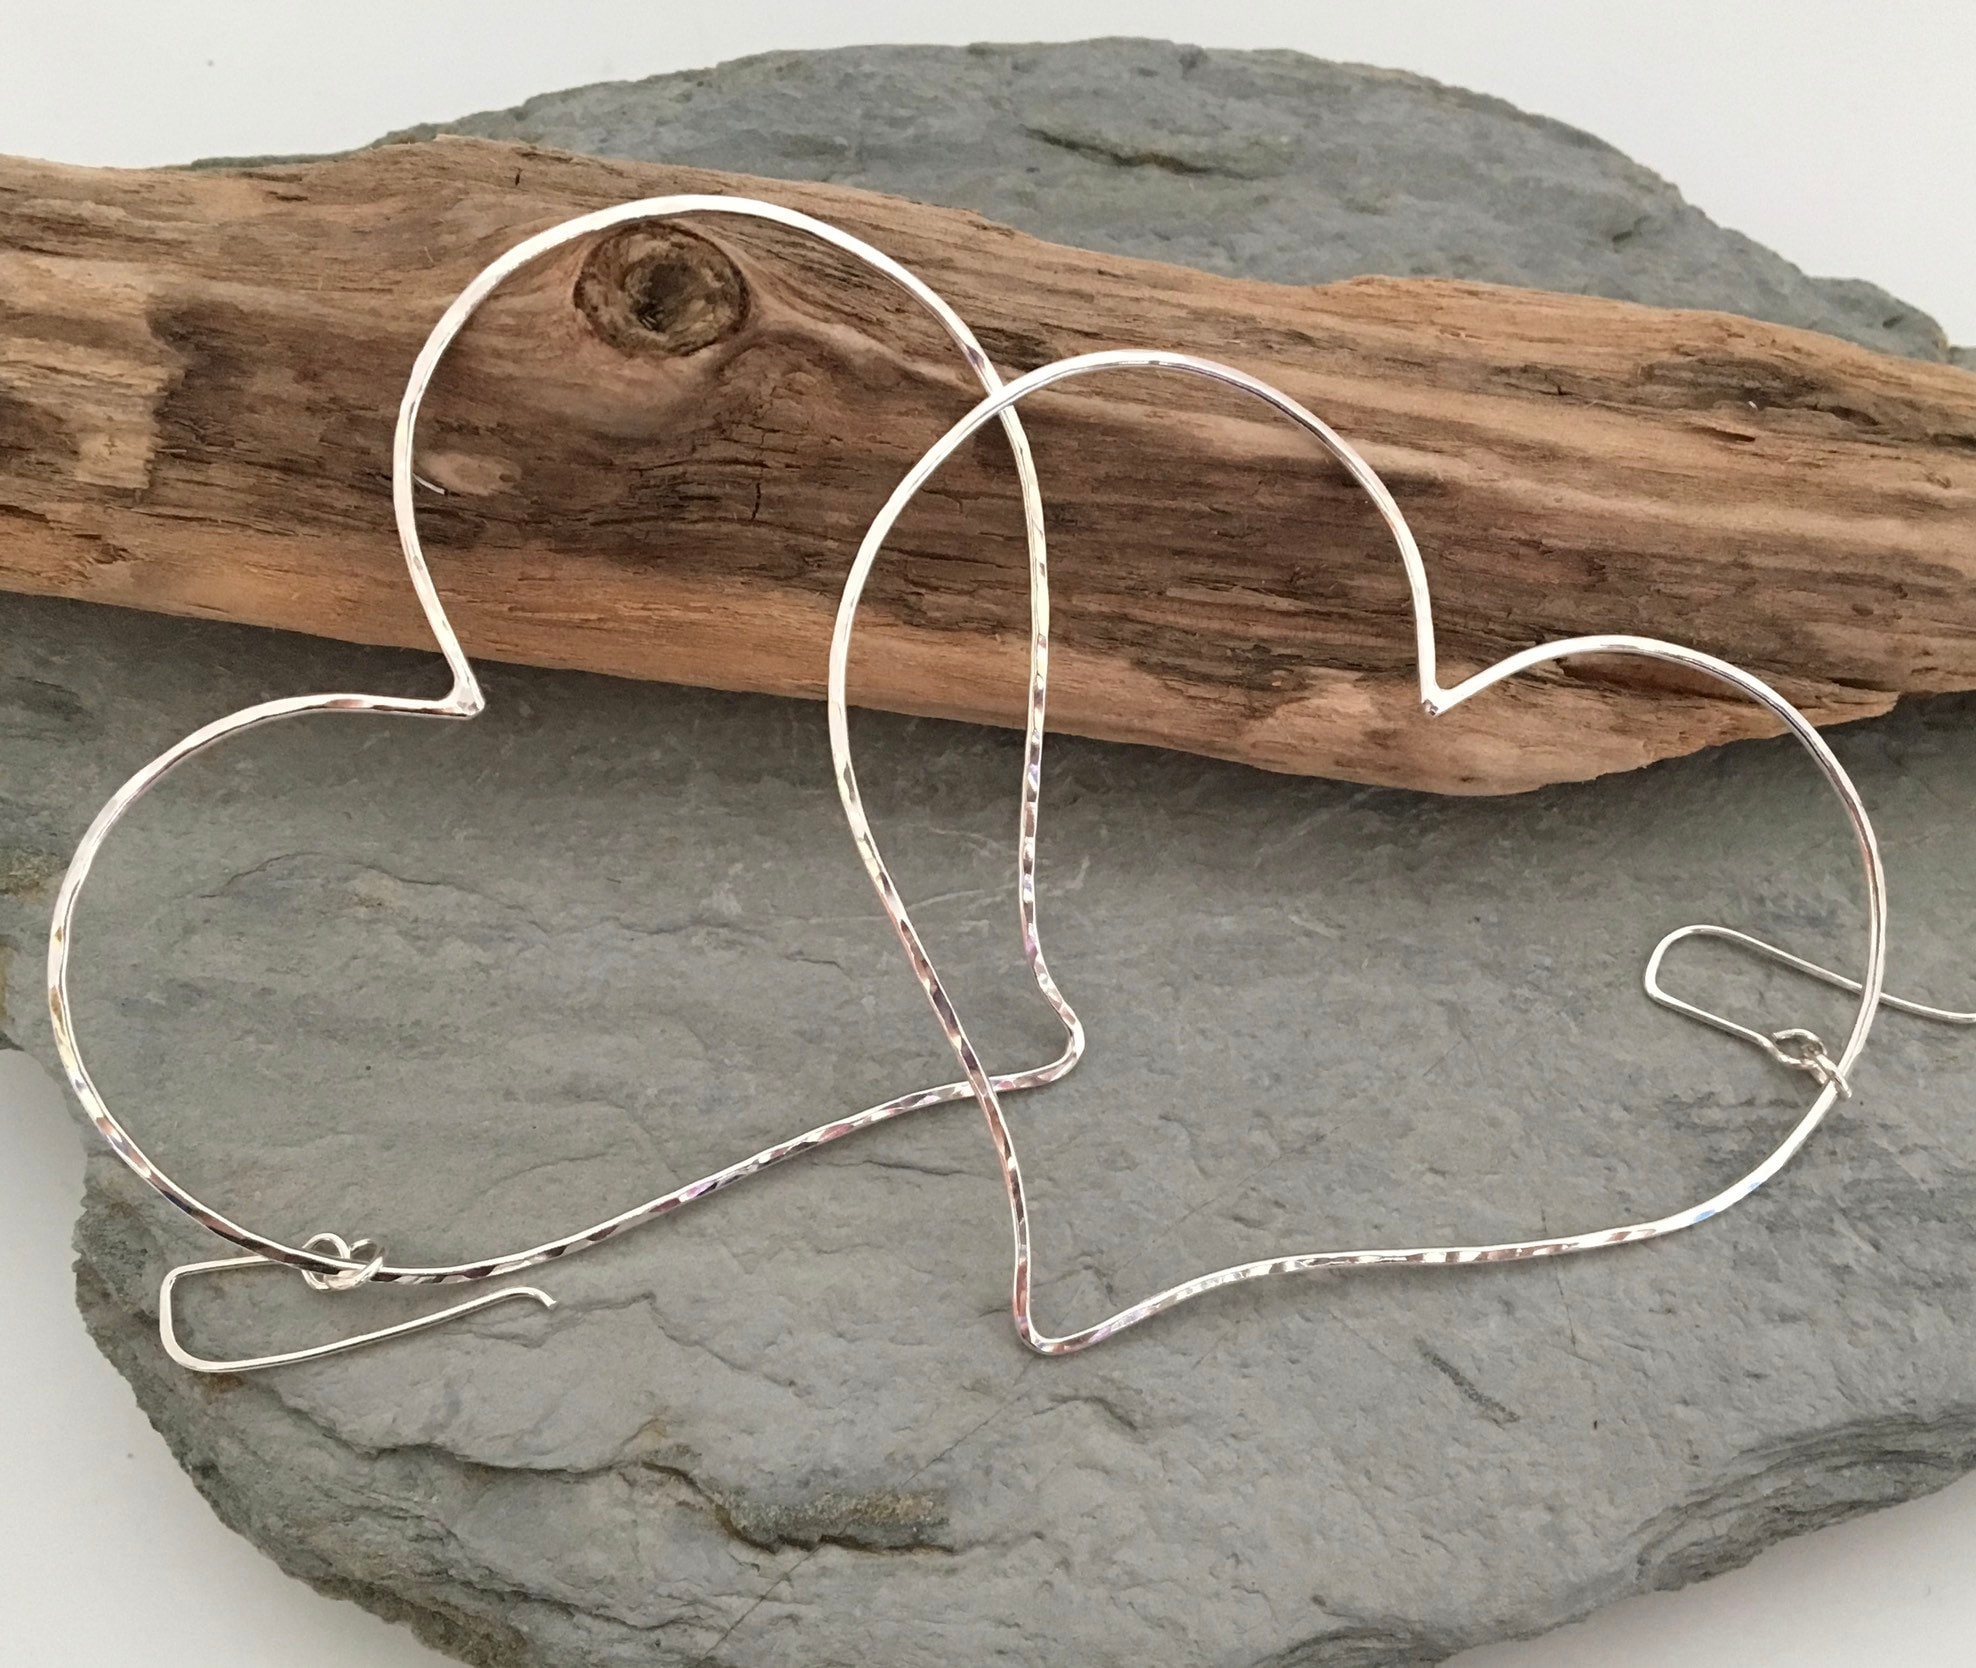 Large Open Heart Earrings, Hammered Silver Hoop Giant Big Hoops, Perfect Valentines Present